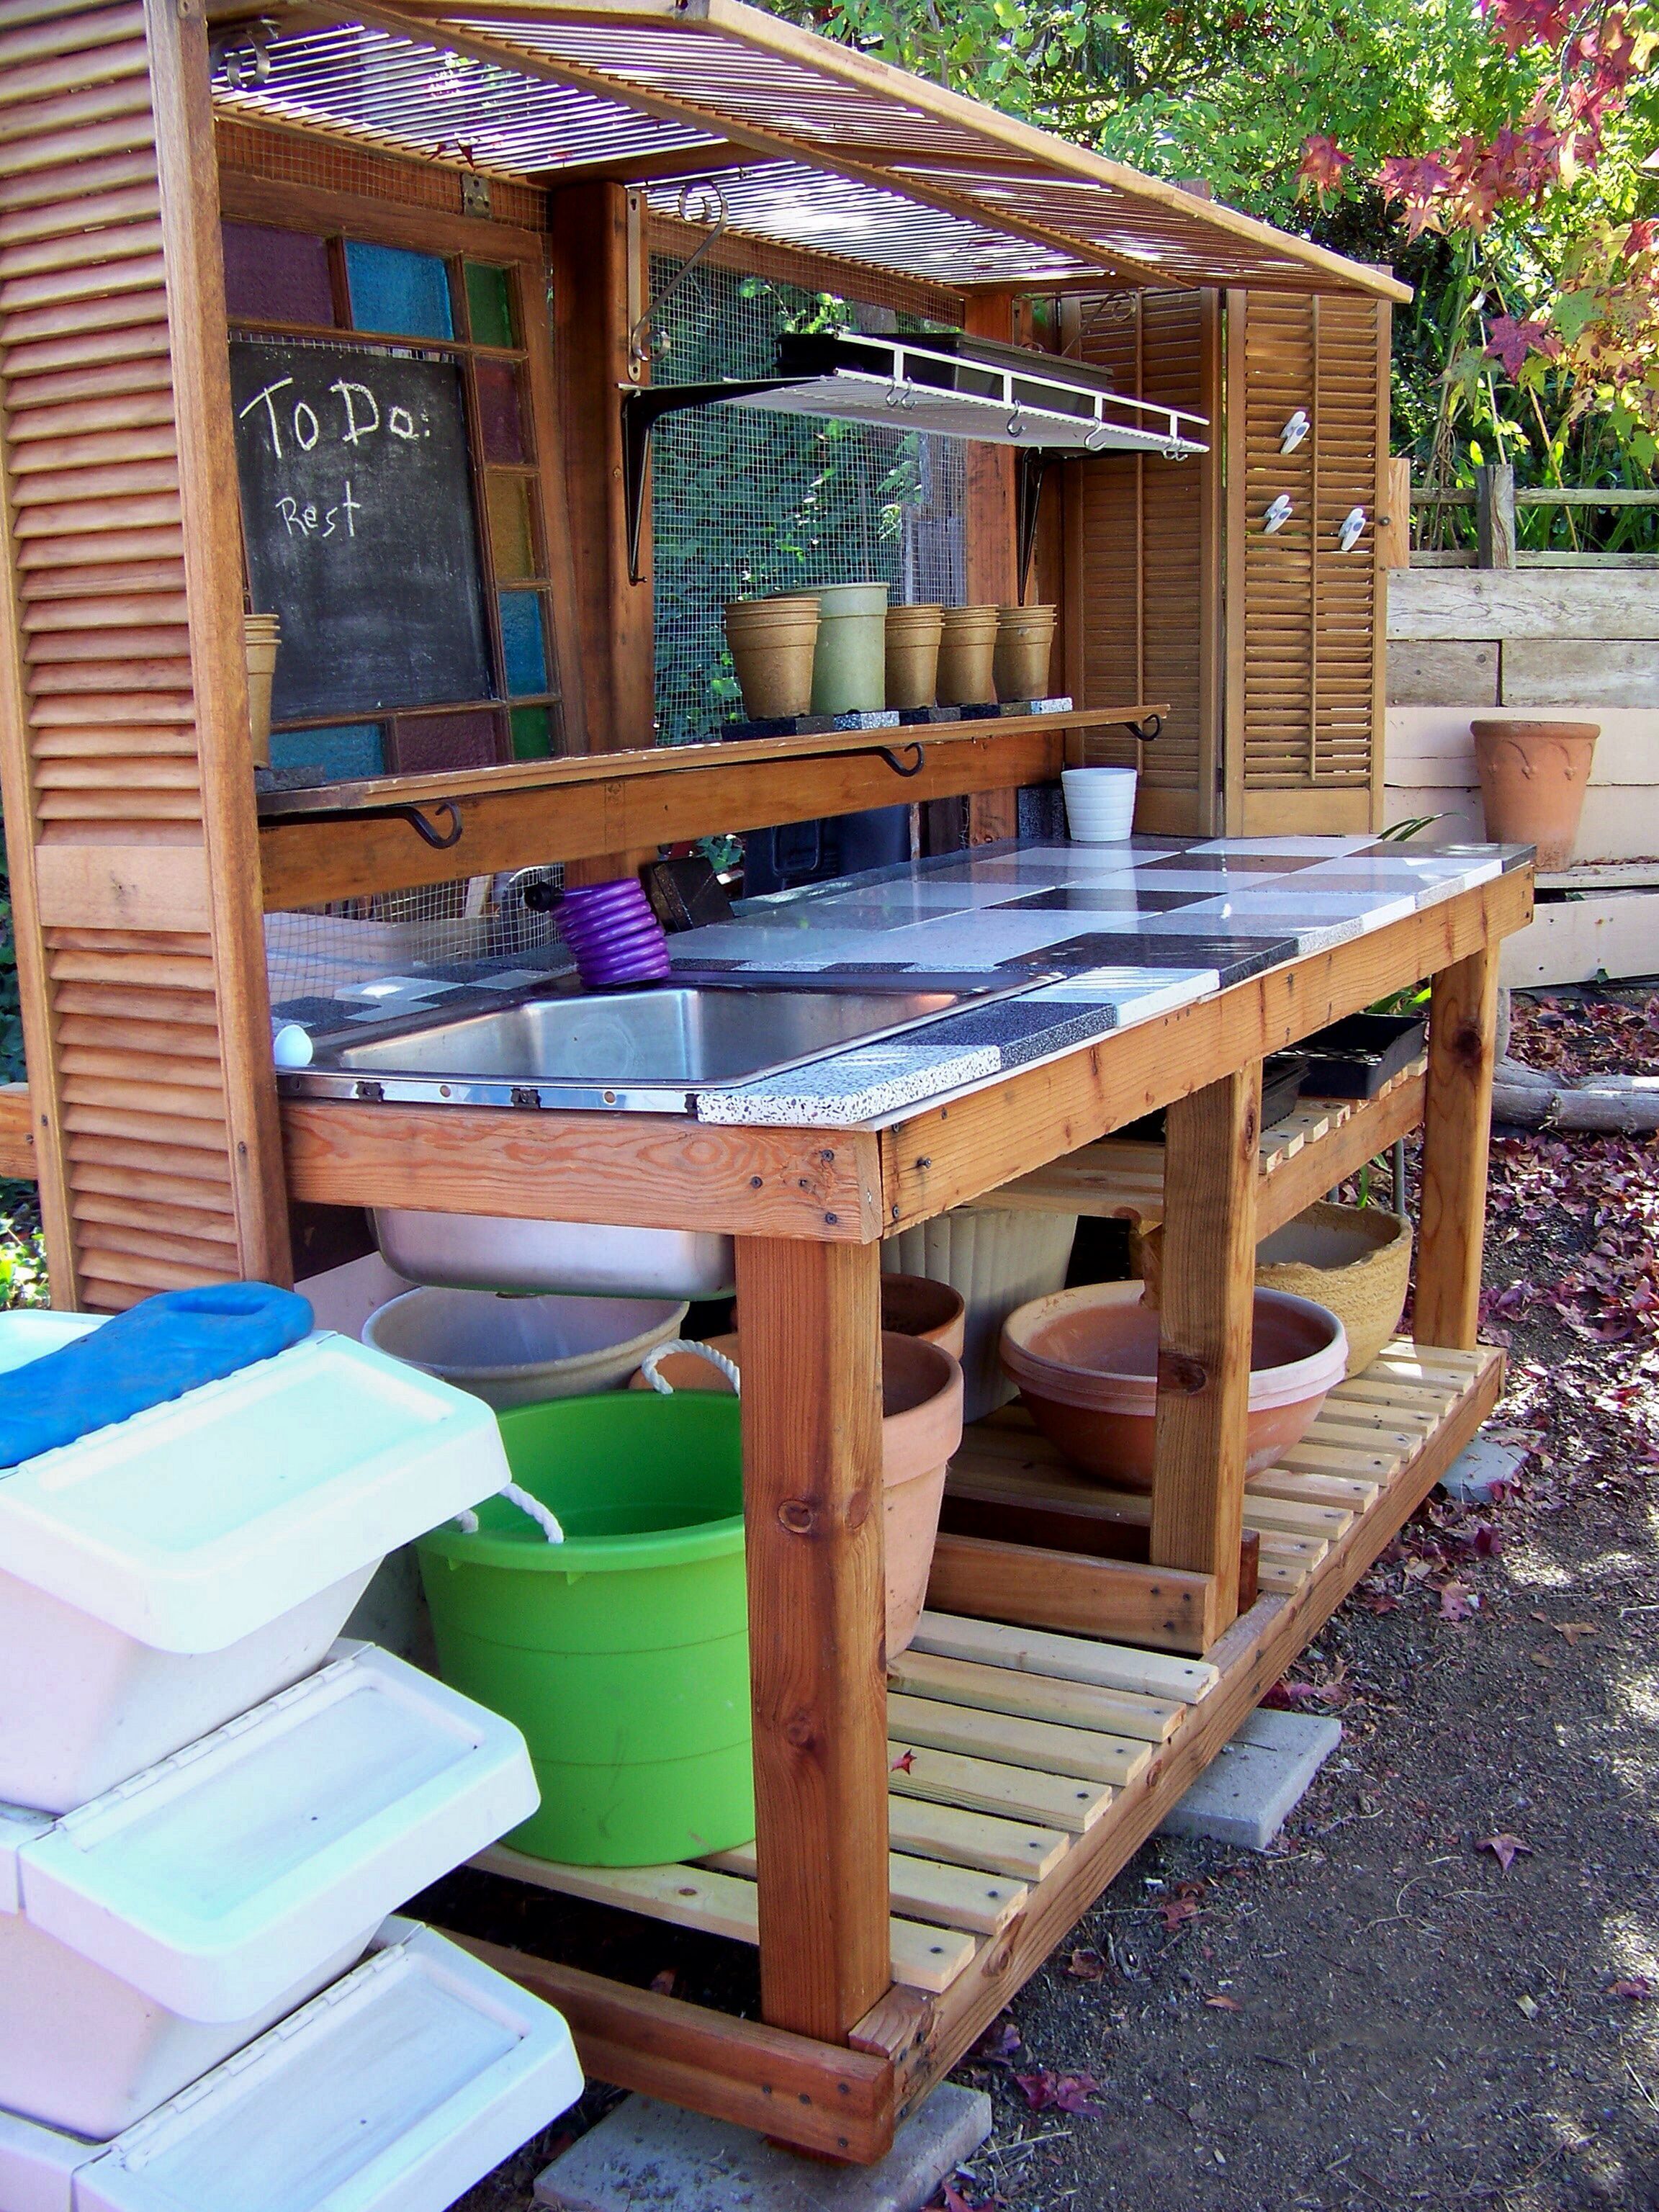 Awesome Diy Pallet Garden Bench And Storage Design Ideasawesome